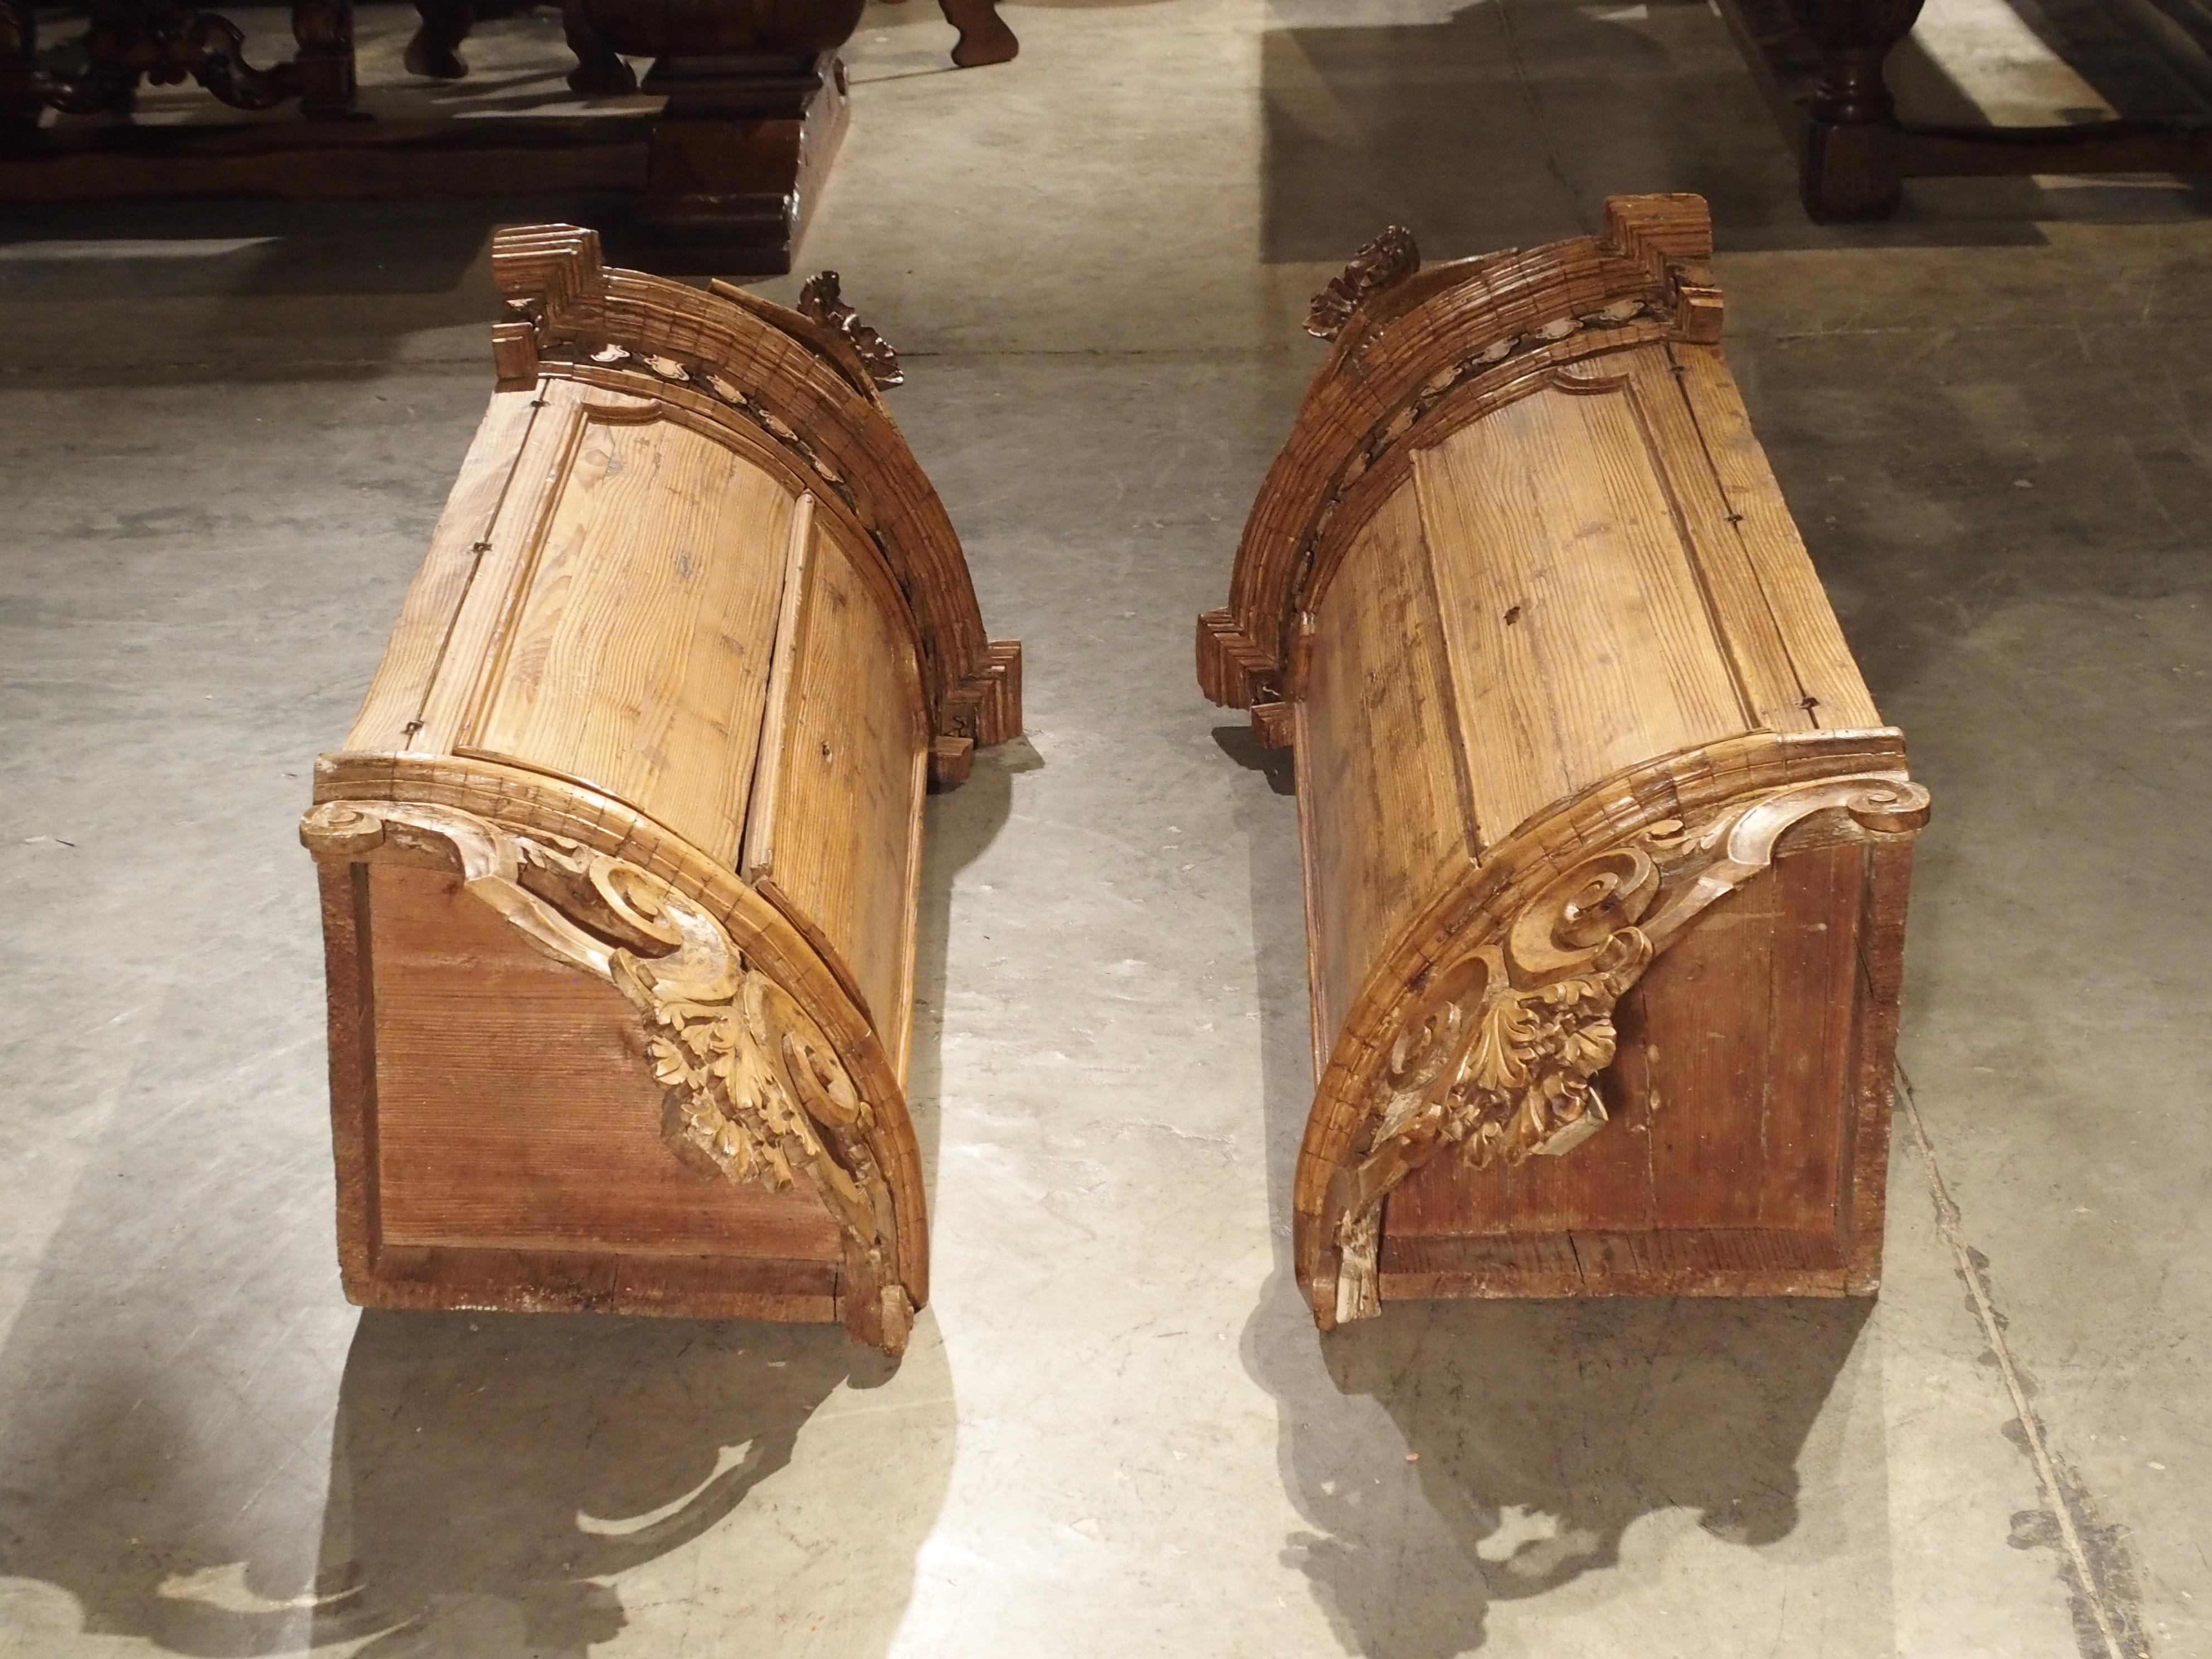 This is an extremely unusual pair of hanging cabinets constructed of natural pine, which date to circa 1740. These would have been commissioned for an important villa, each hanging high in an opposing corner. The old locks would have secured